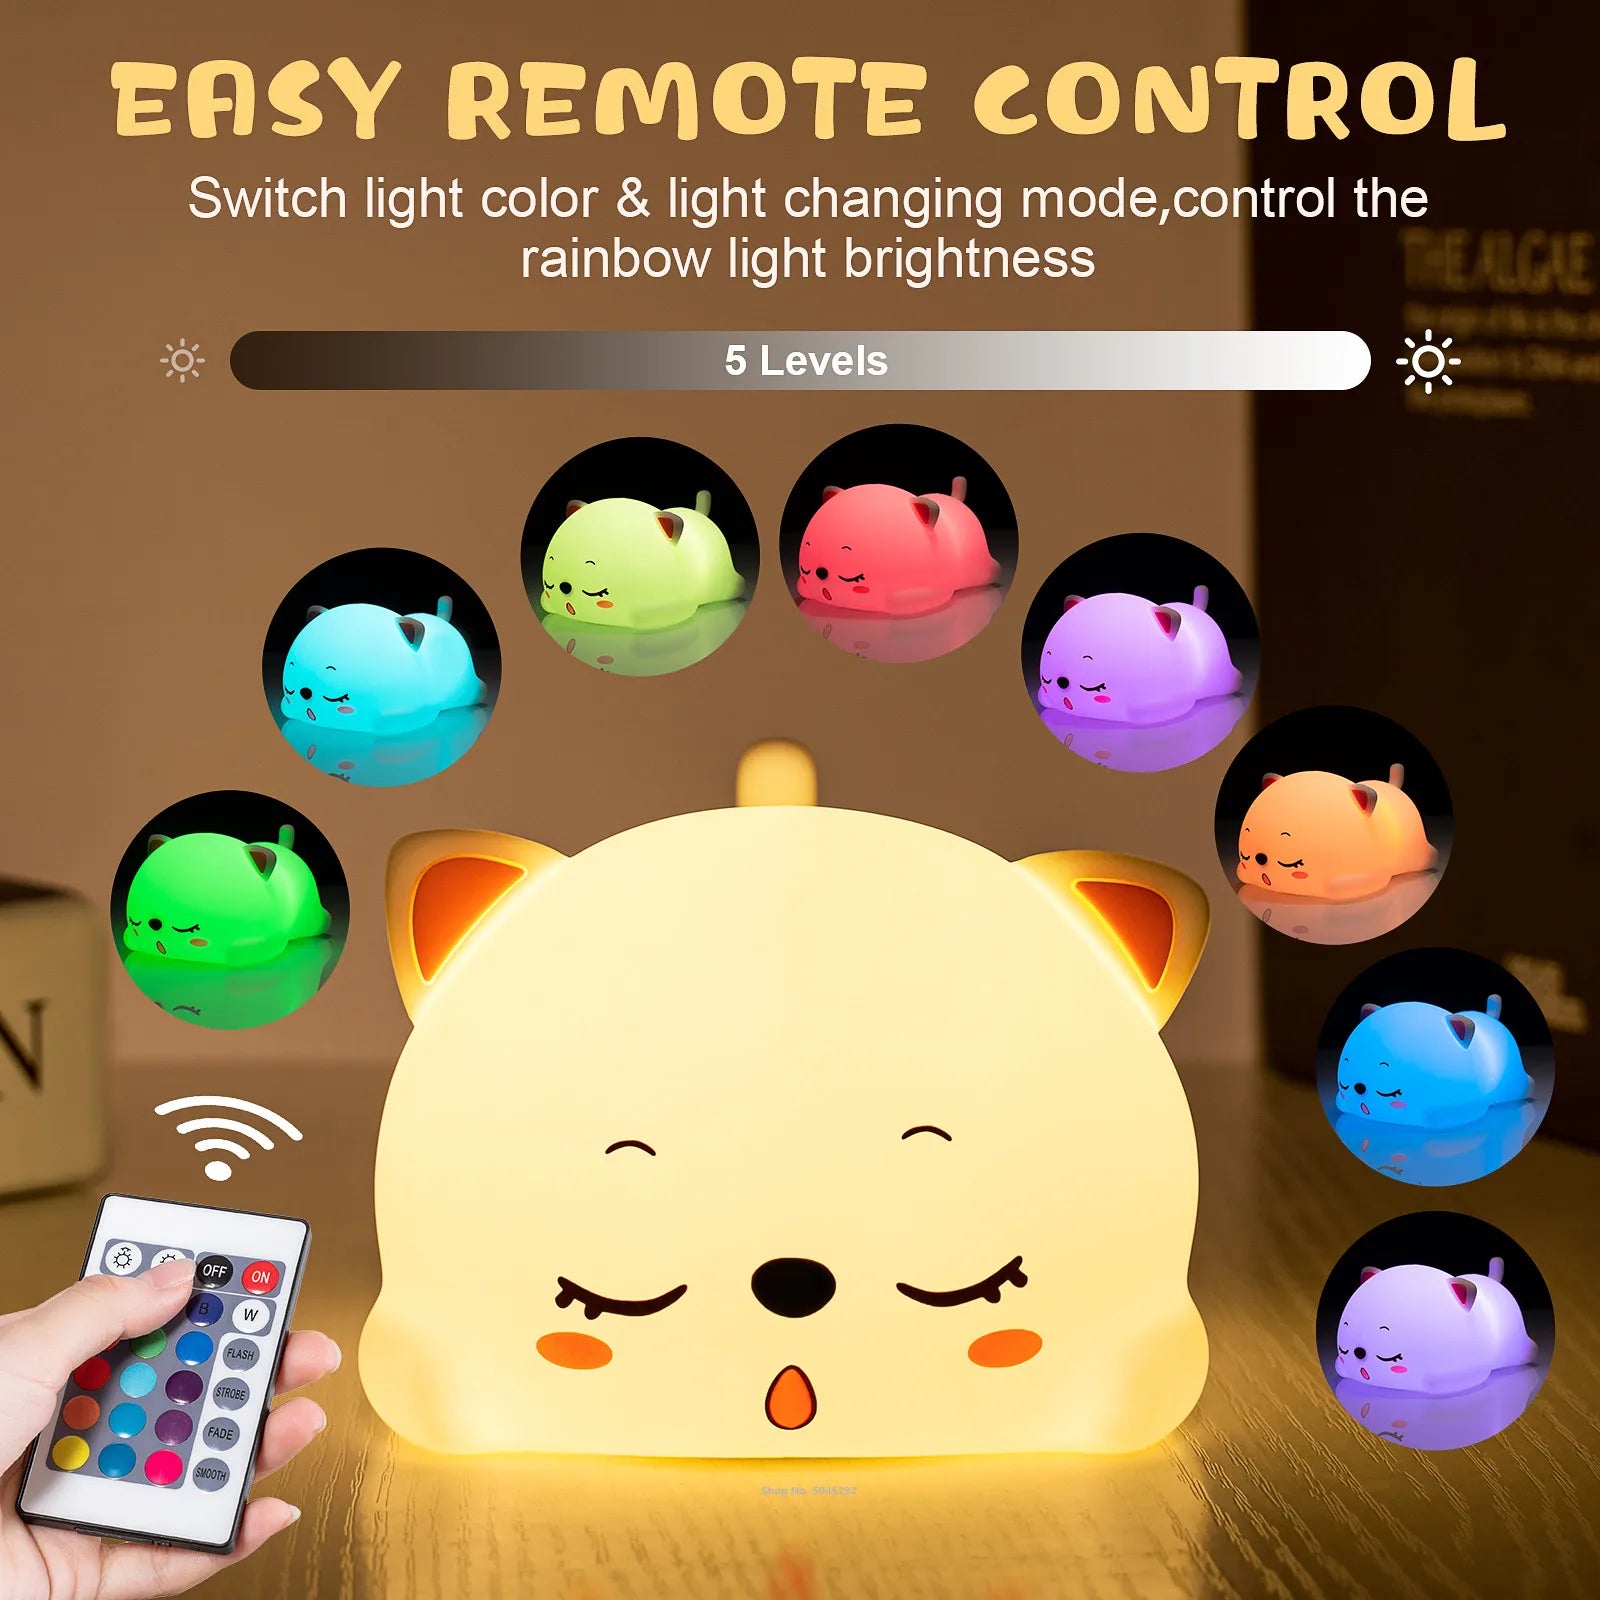 remote control cat-shaped table lamp variations